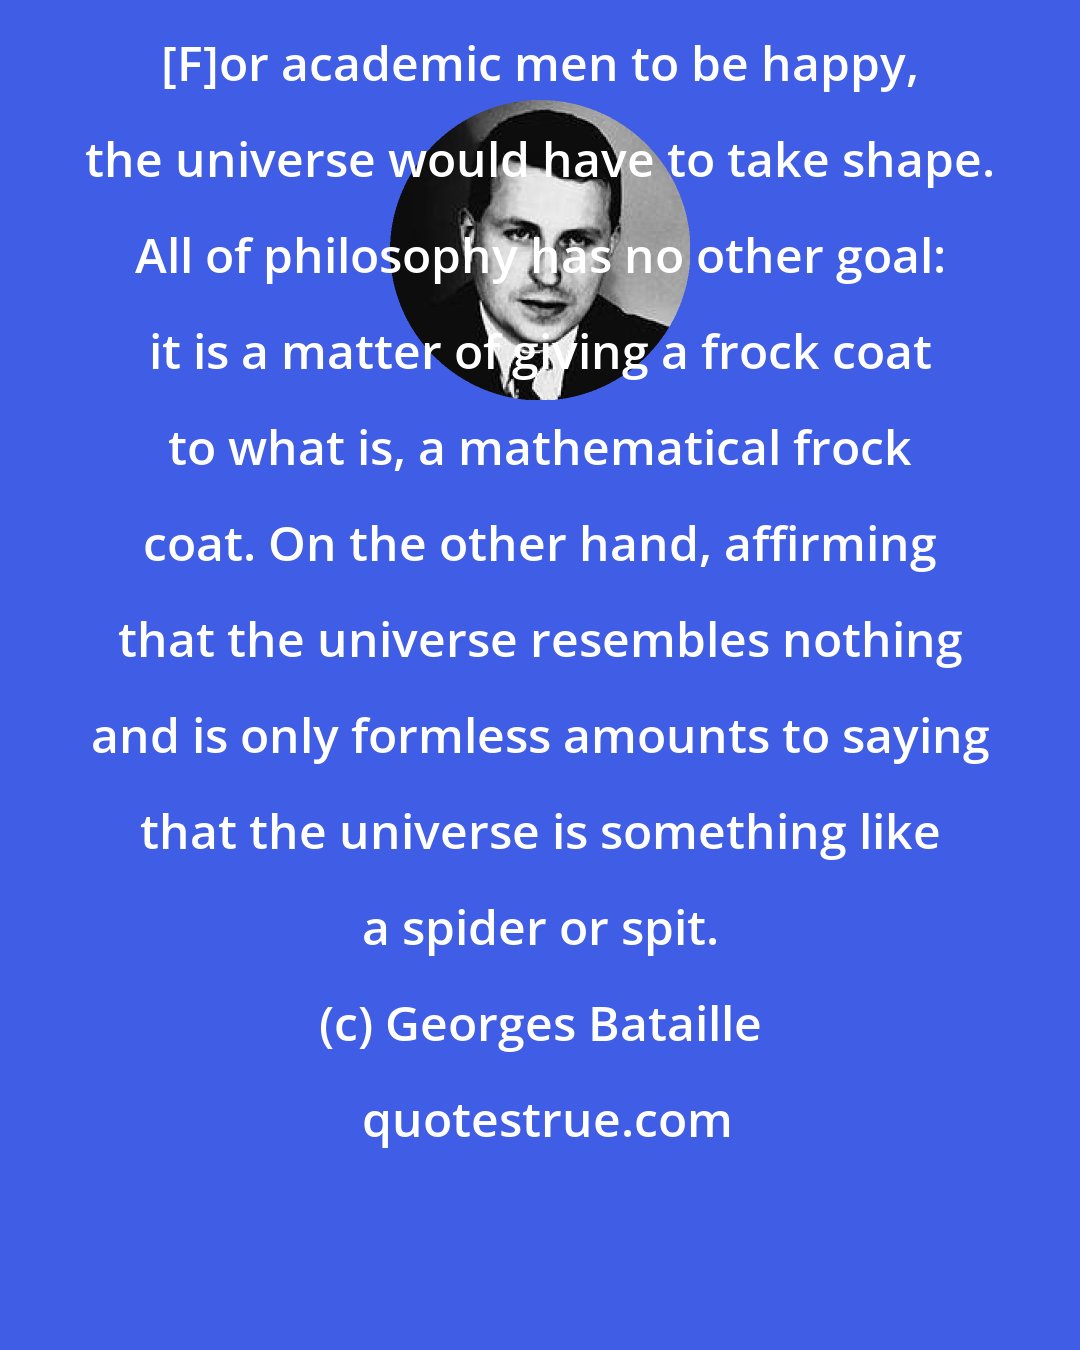 Georges Bataille: [F]or academic men to be happy, the universe would have to take shape. All of philosophy has no other goal: it is a matter of giving a frock coat to what is, a mathematical frock coat. On the other hand, affirming that the universe resembles nothing and is only formless amounts to saying that the universe is something like a spider or spit.